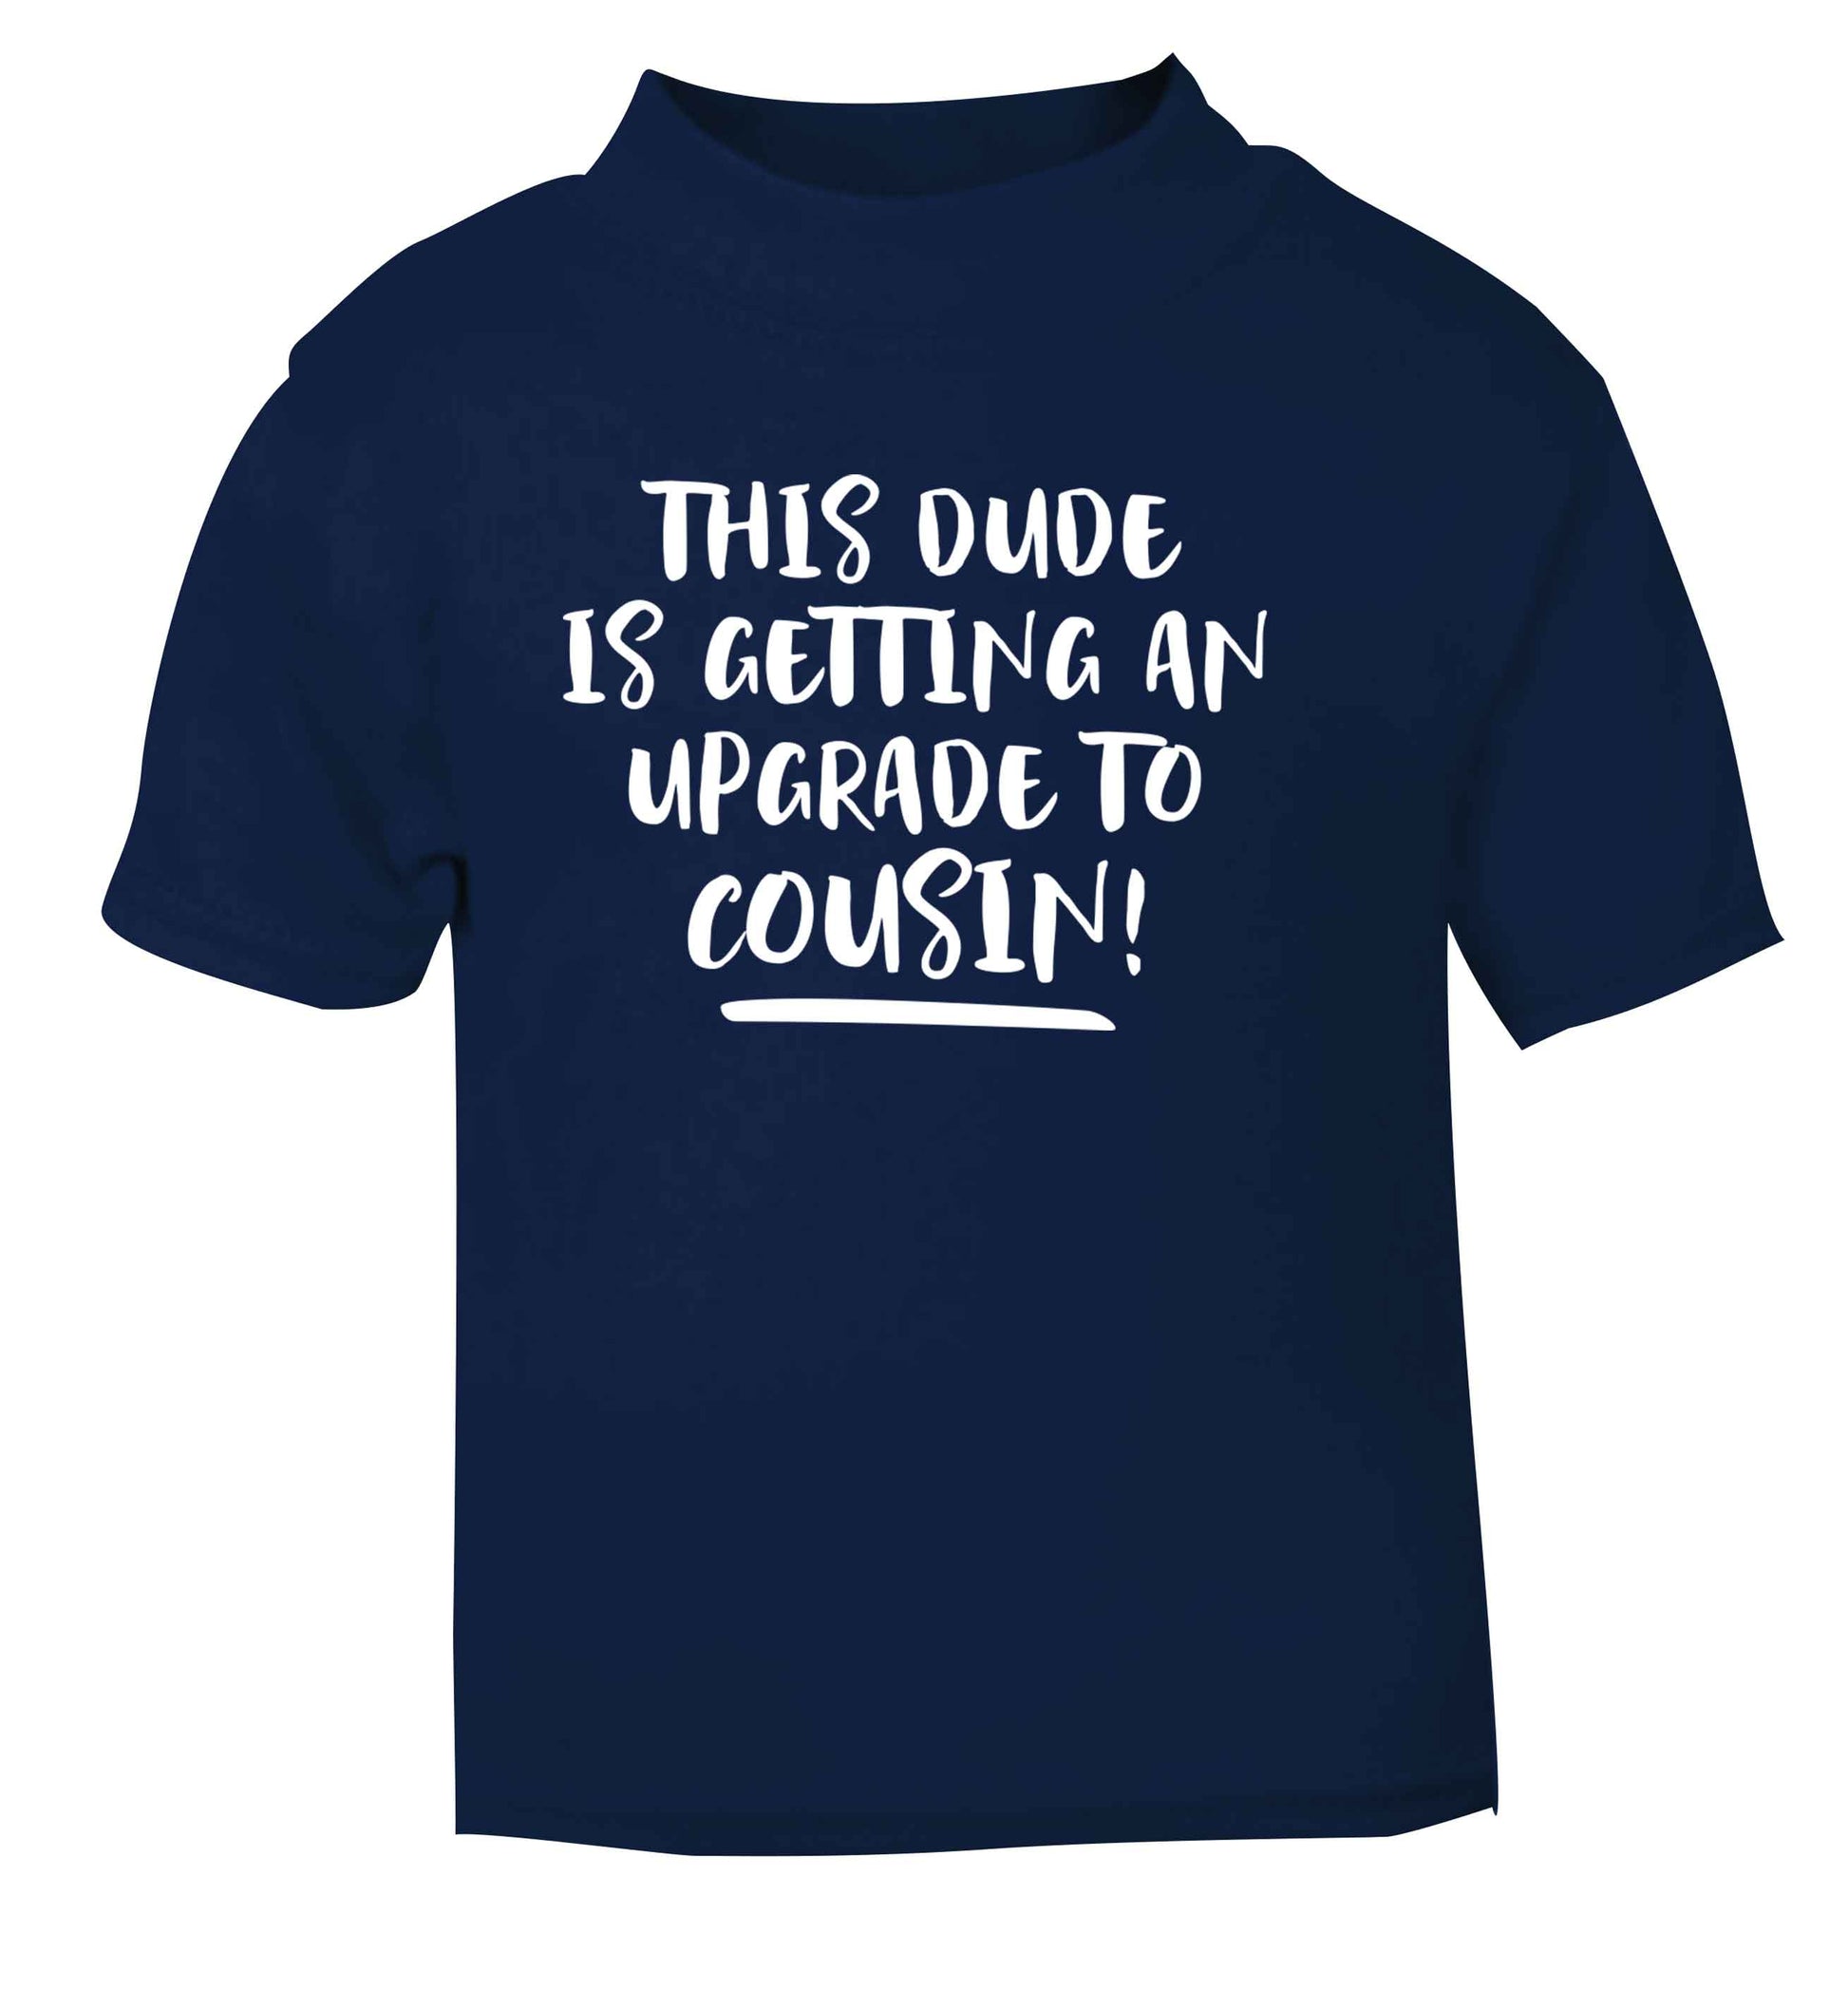 This dude is getting an upgrade to cousin! navy Baby Toddler Tshirt 2 Years